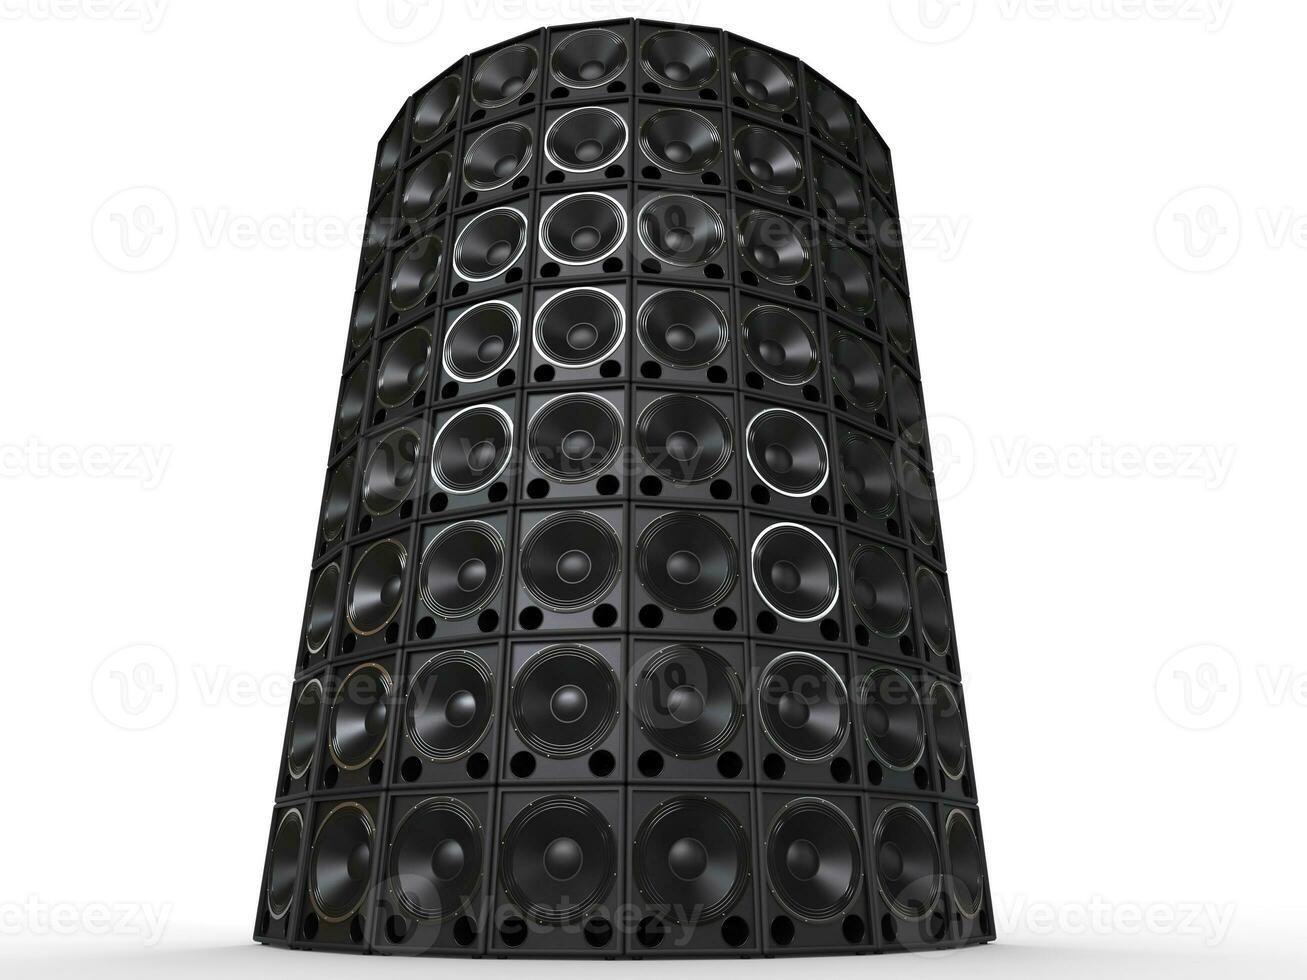 Tower of hifi woofer speakers photo